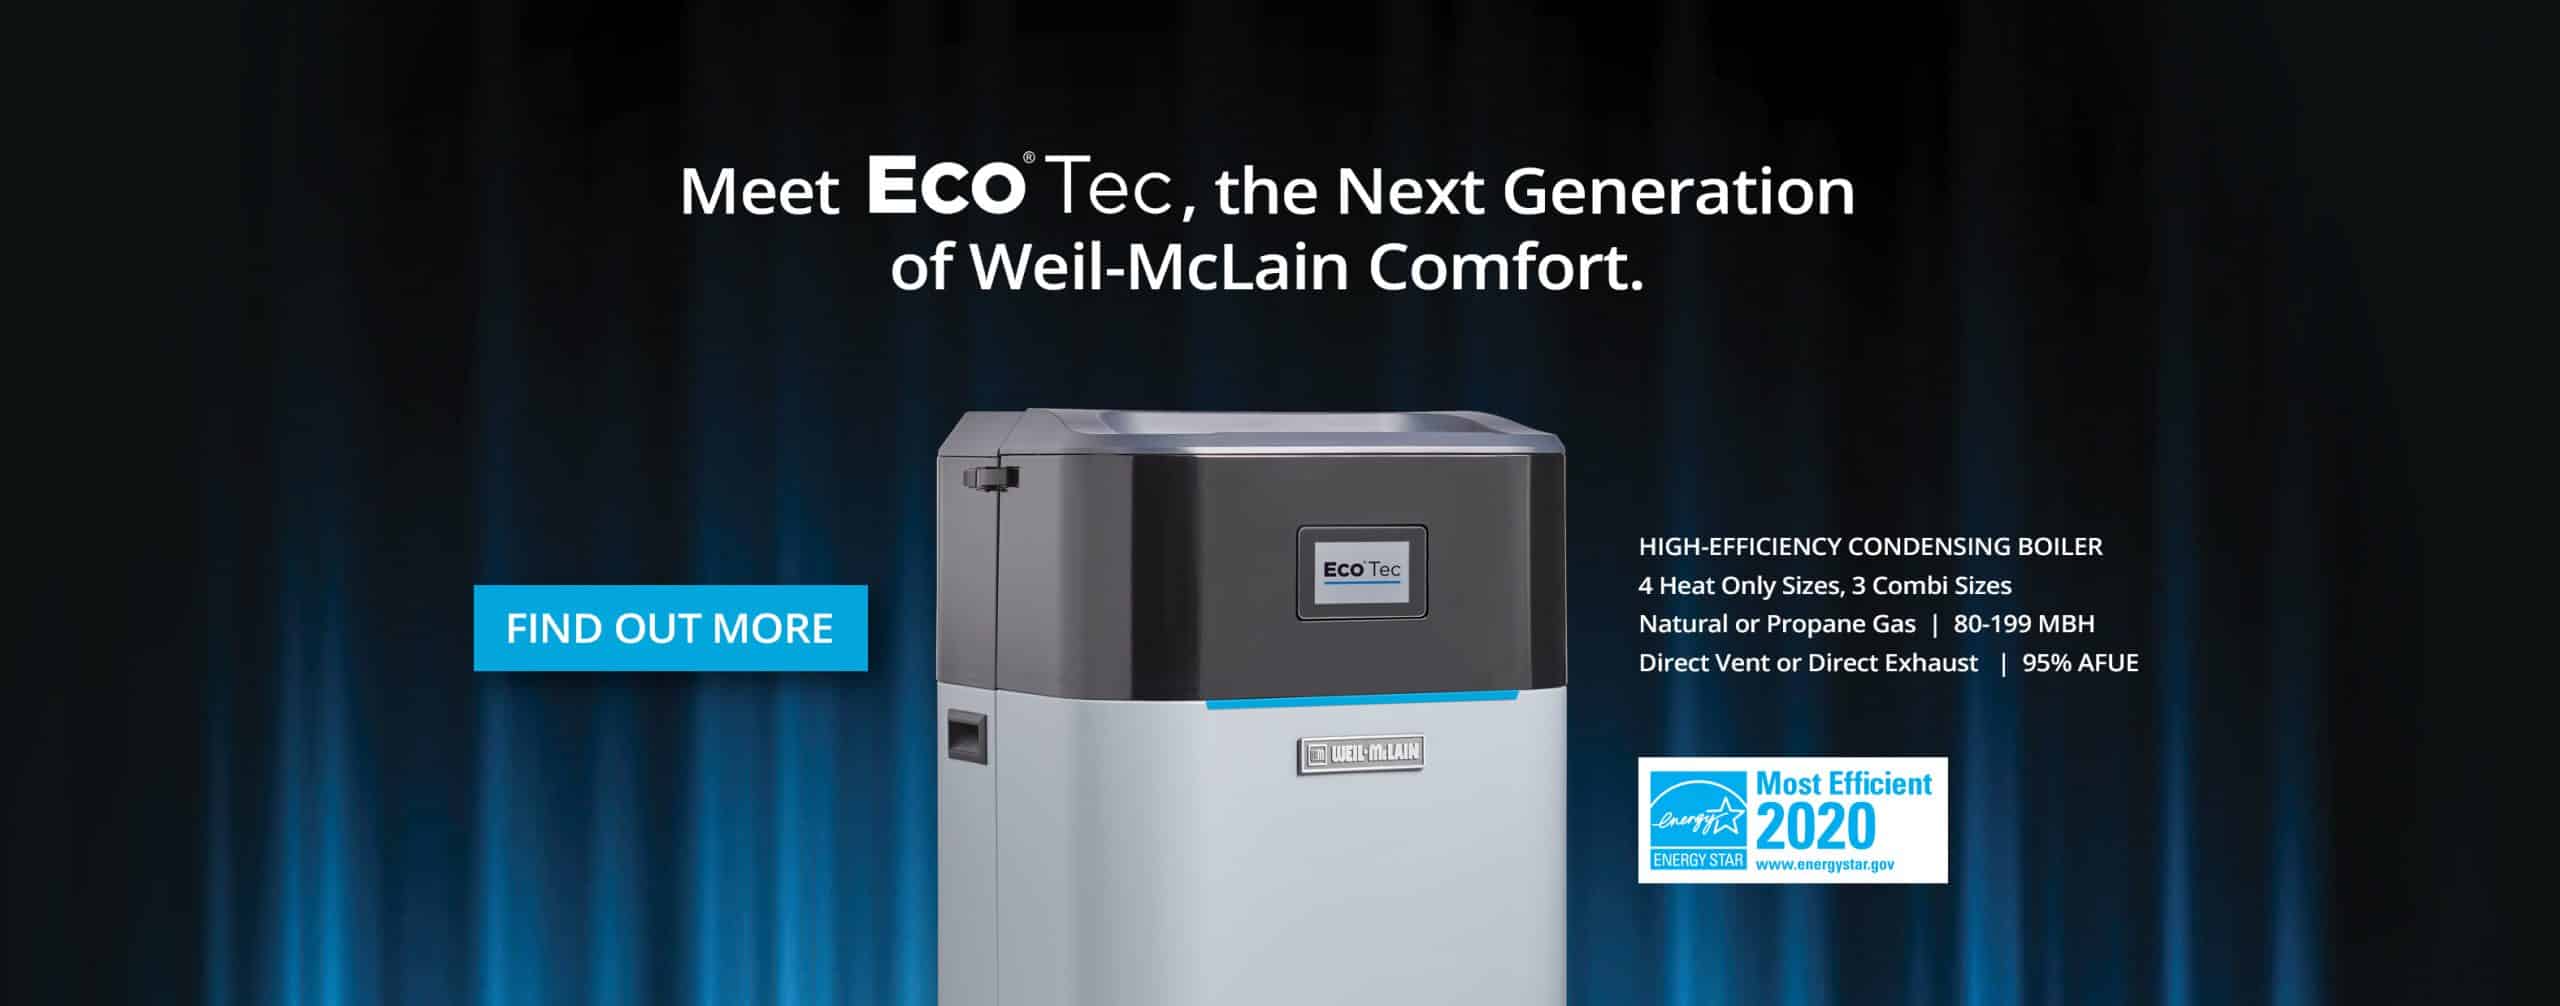 The new ECO Tec from Weil-McLain Canada is a high-efficiency condensing boiler wiht 4 heat-only and 3 combi sizes